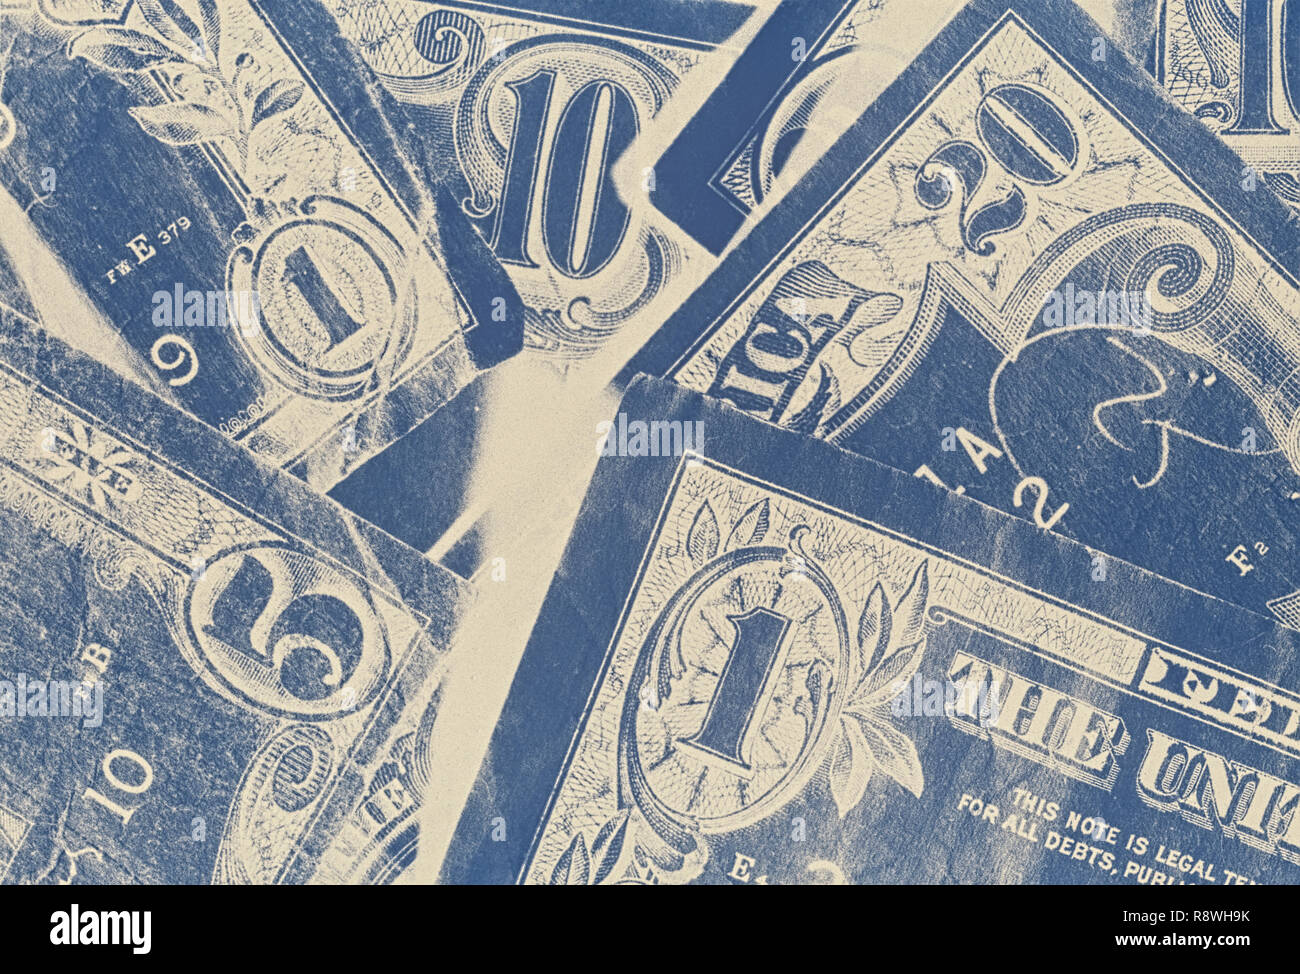 Closeup of money, paper currency and US Dollar bills in a monochromatic format or technique Stock Photo